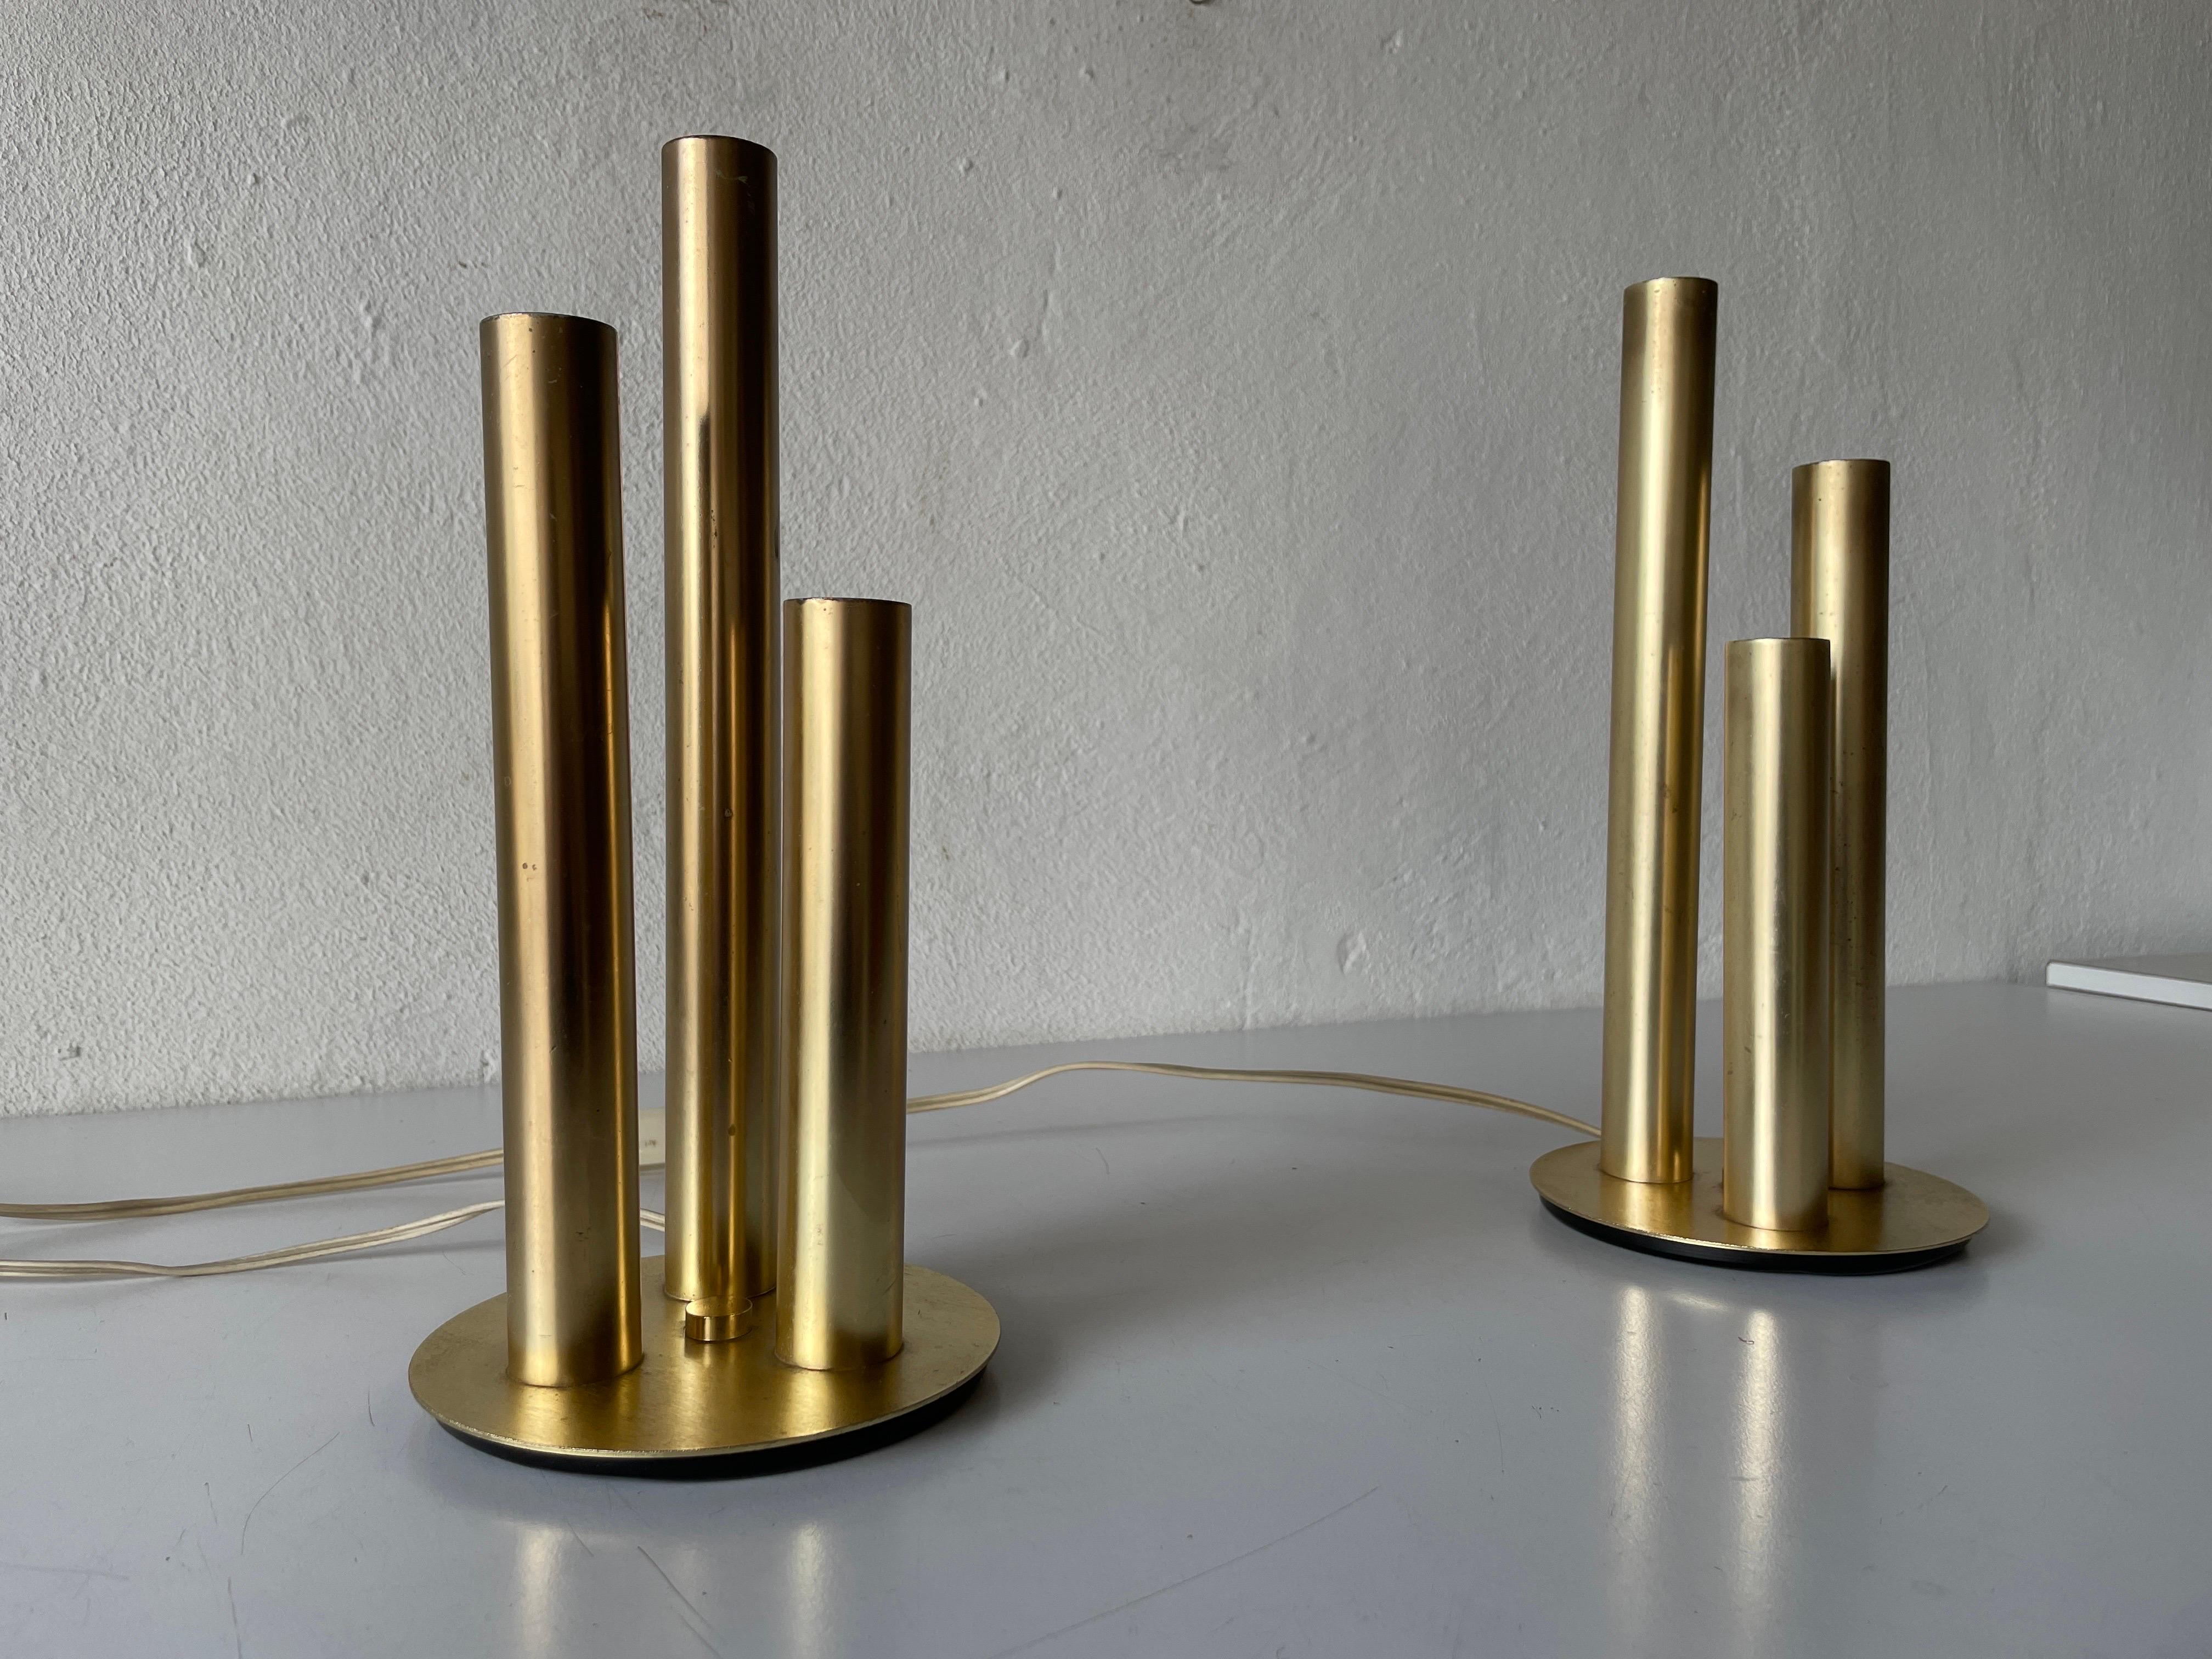 Brass 3 Cylinder Modernist Pair of Table Lamps, 1960s, Italy

Lampshade is in very good vintage condition.

It has European plug. It can be converted to other countries plugs with using converter. Also it can be rewired different type of plugs that